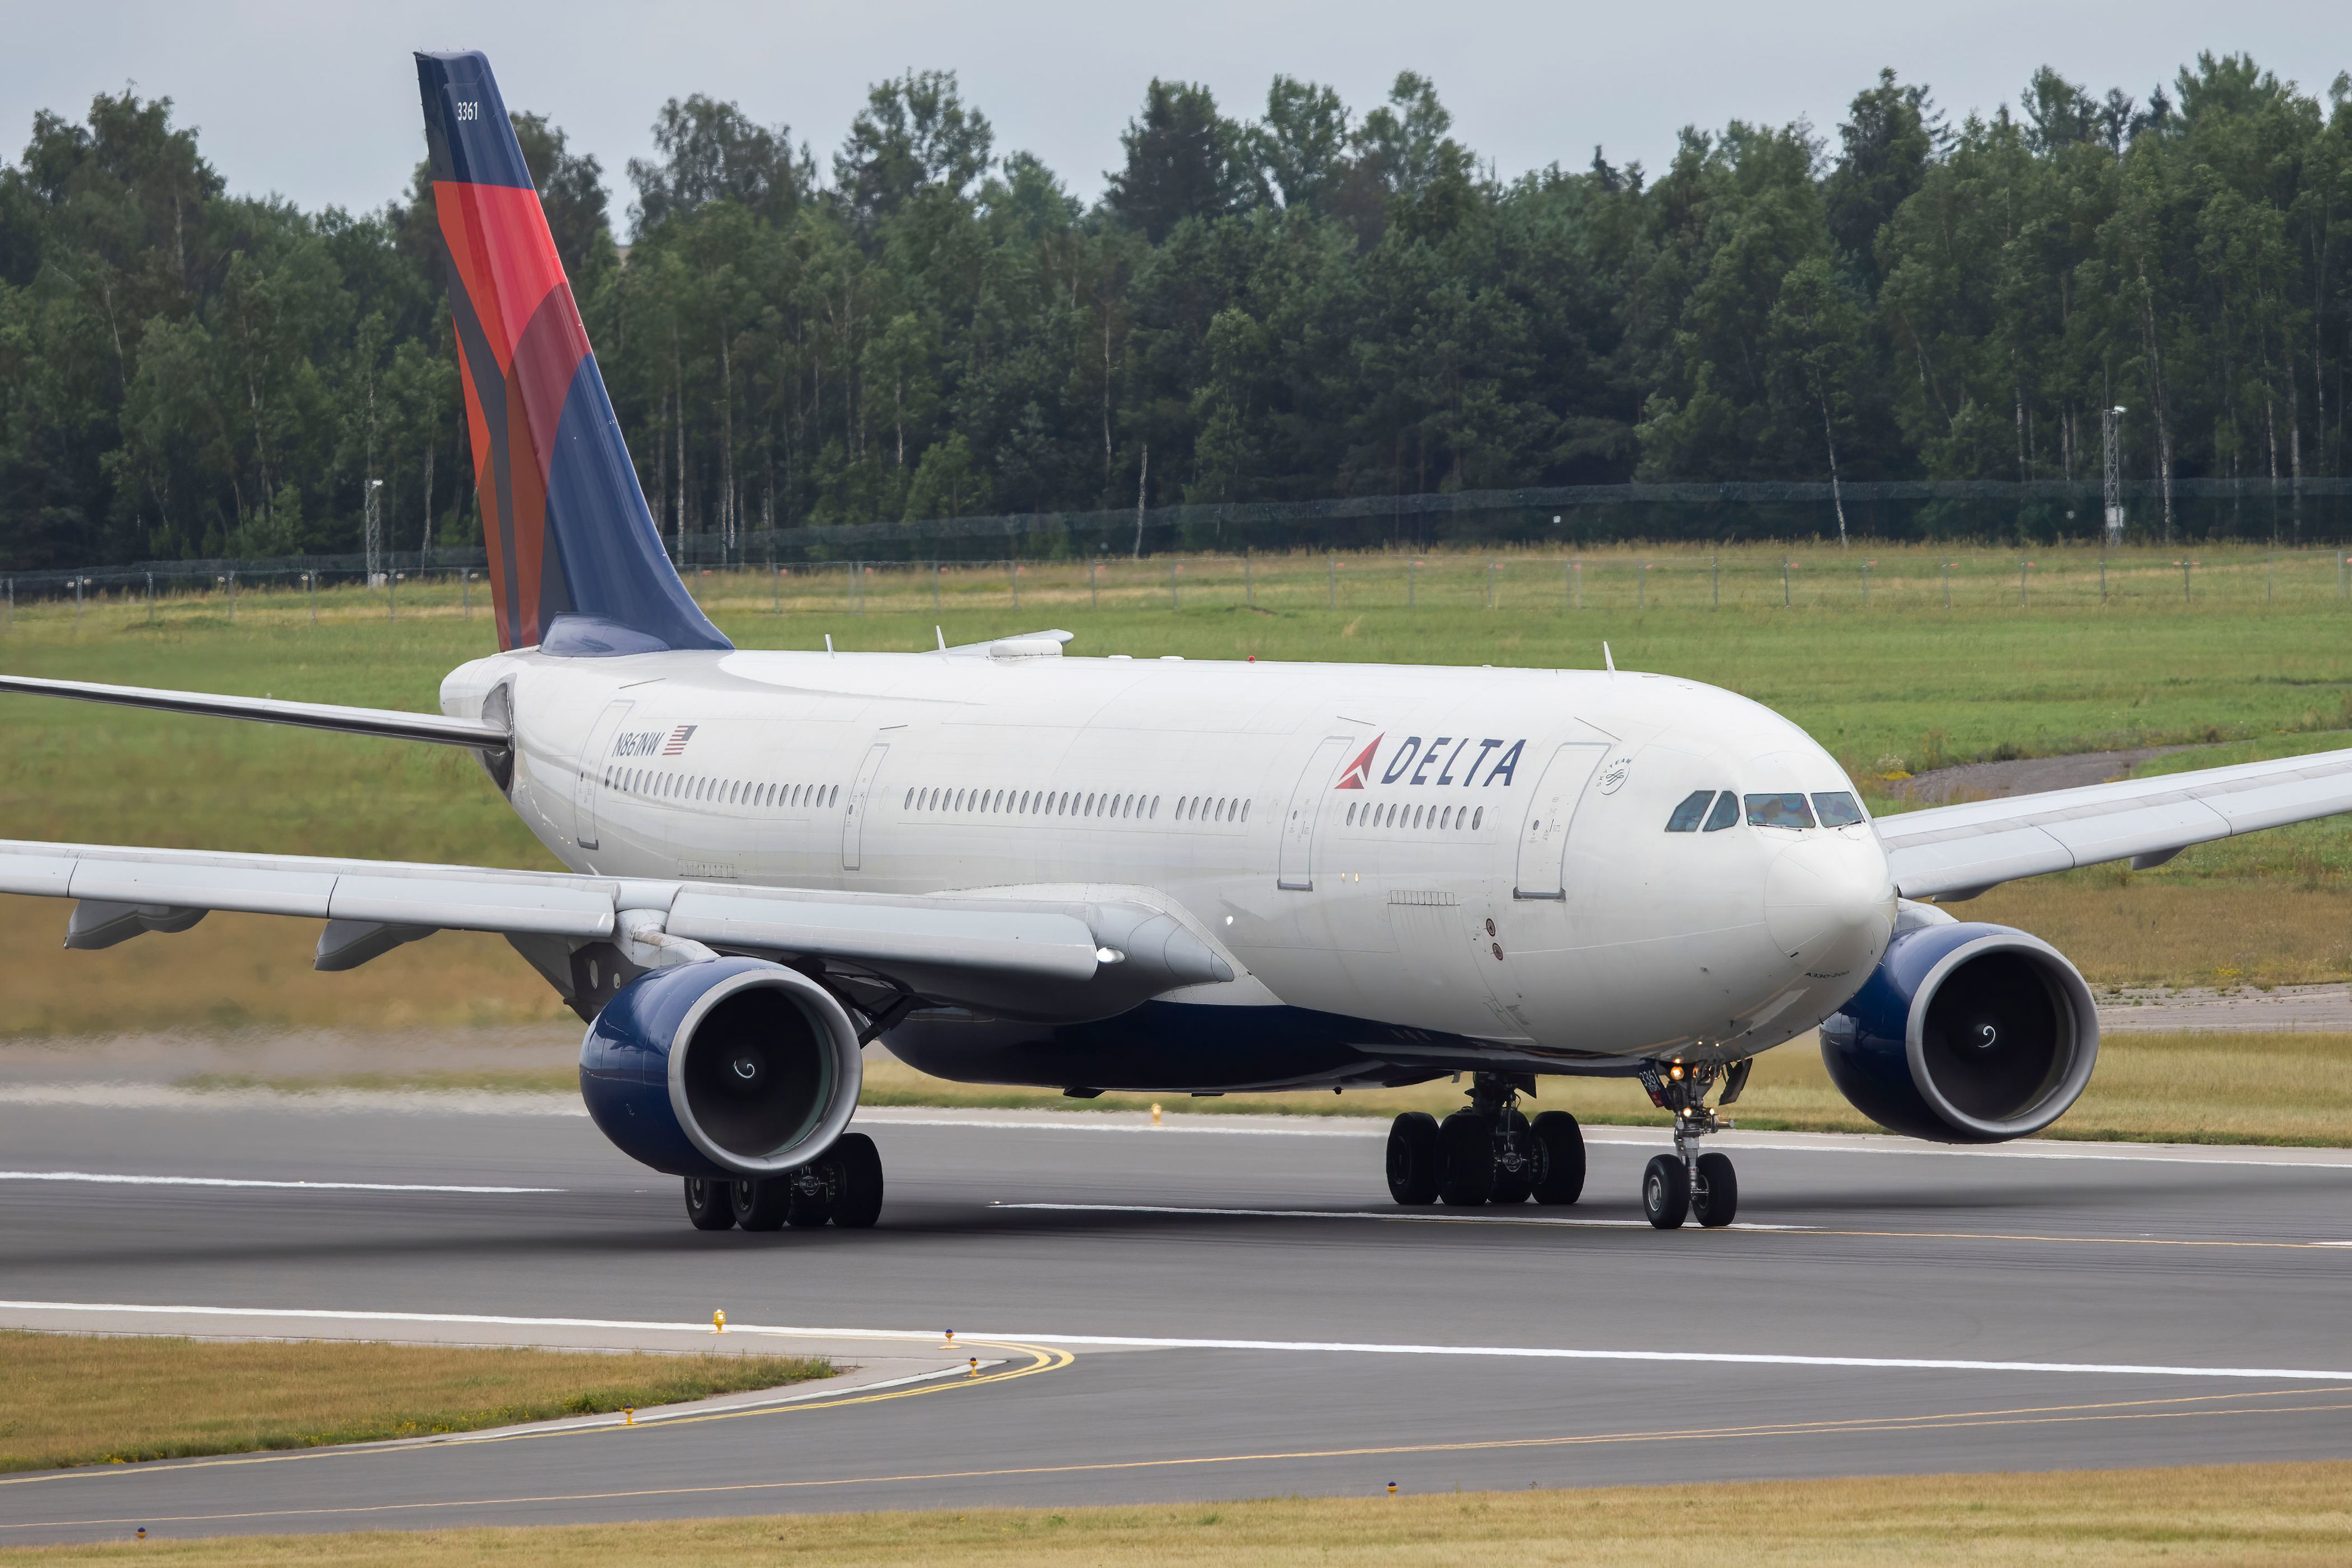 runway lights were “not working” during delta air lines airbus a330-200 emergency landing in syracuse